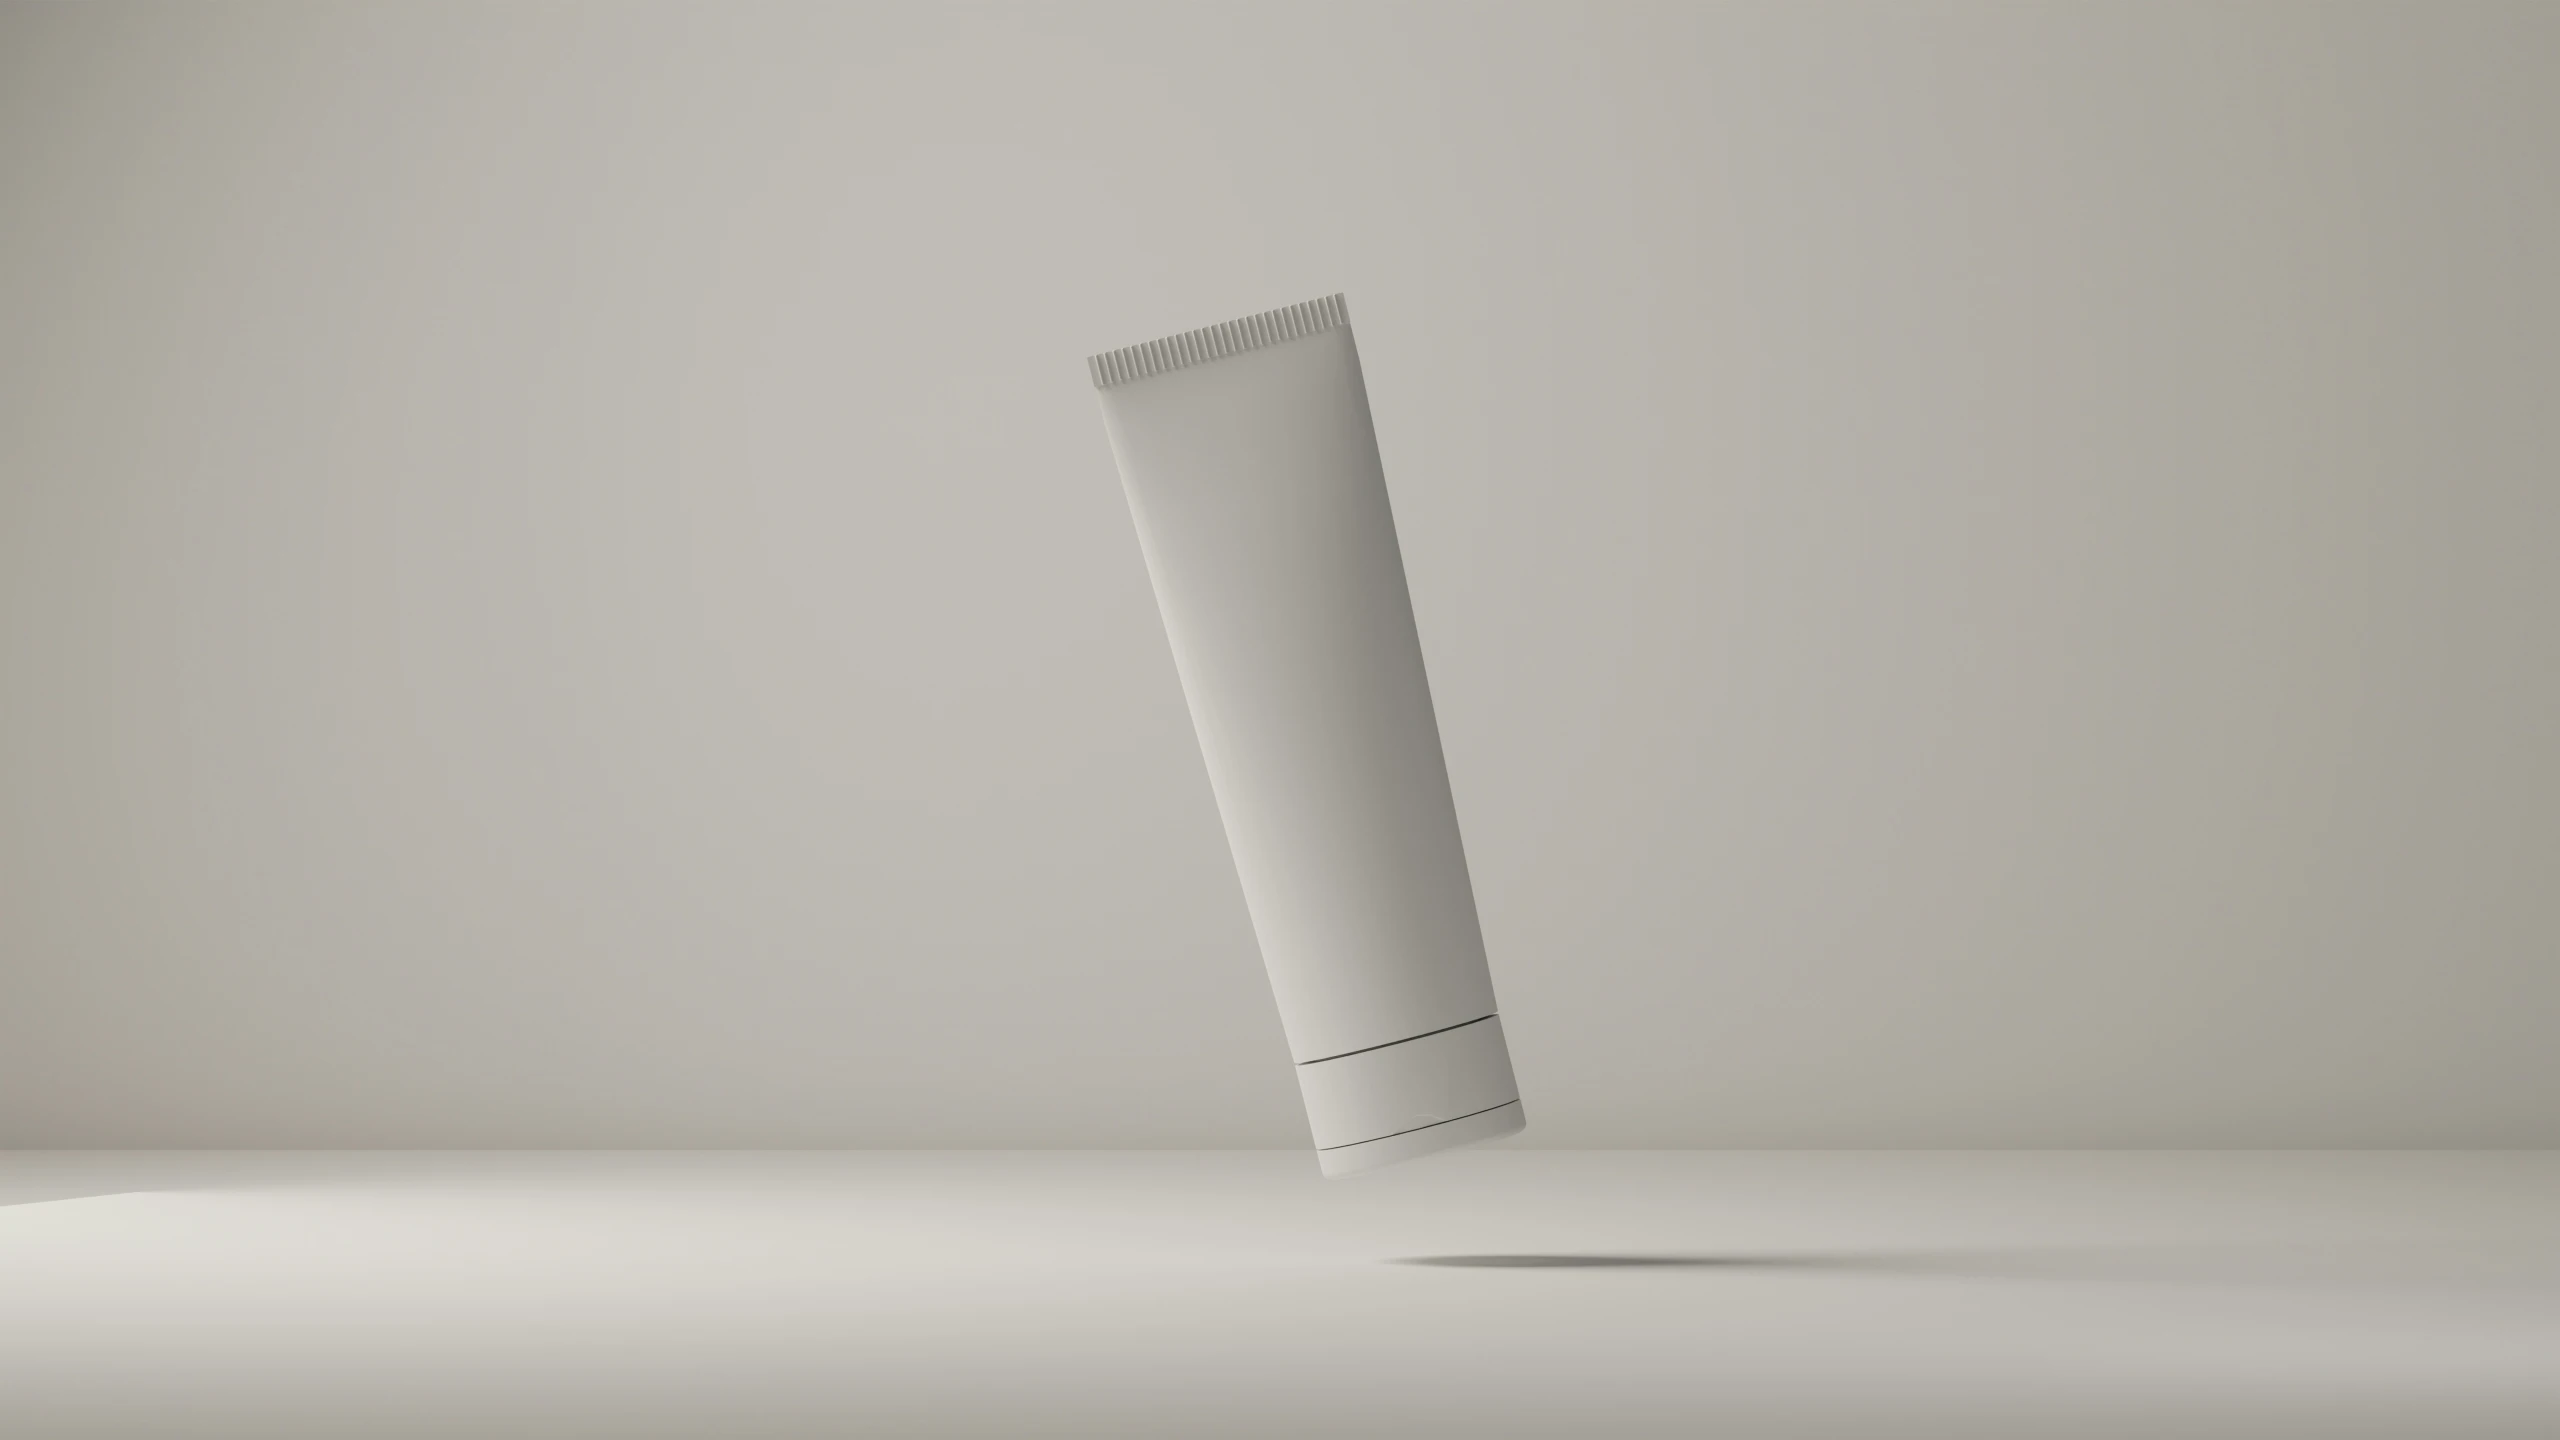 this is an empty white object with a long tube